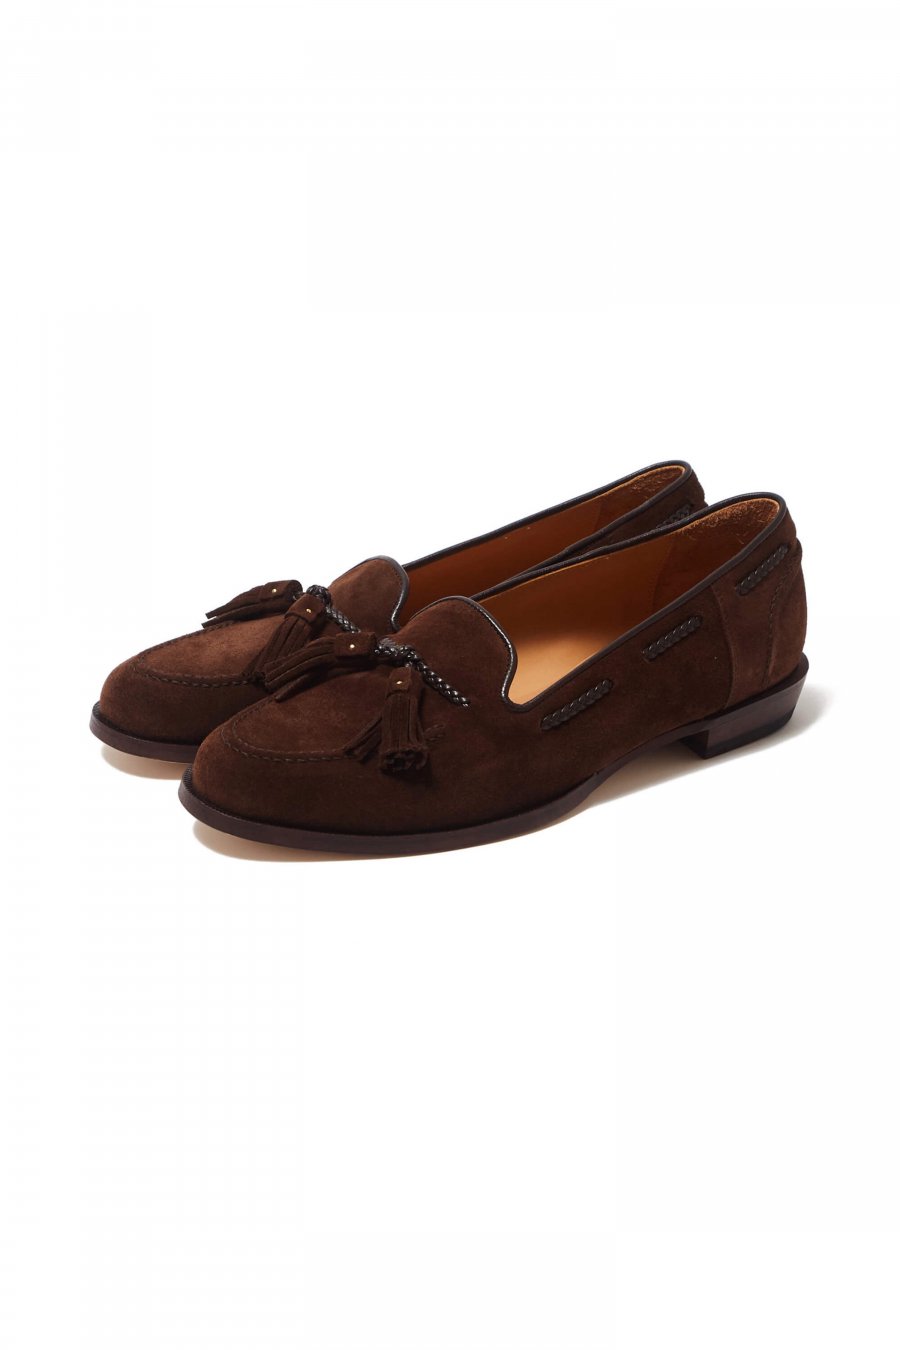 SUGARHILL  SUEDE LOAFER COUPE(BROWN SUEDE)<img class='new_mark_img2' src='https://img.shop-pro.jp/img/new/icons15.gif' style='border:none;display:inline;margin:0px;padding:0px;width:auto;' />